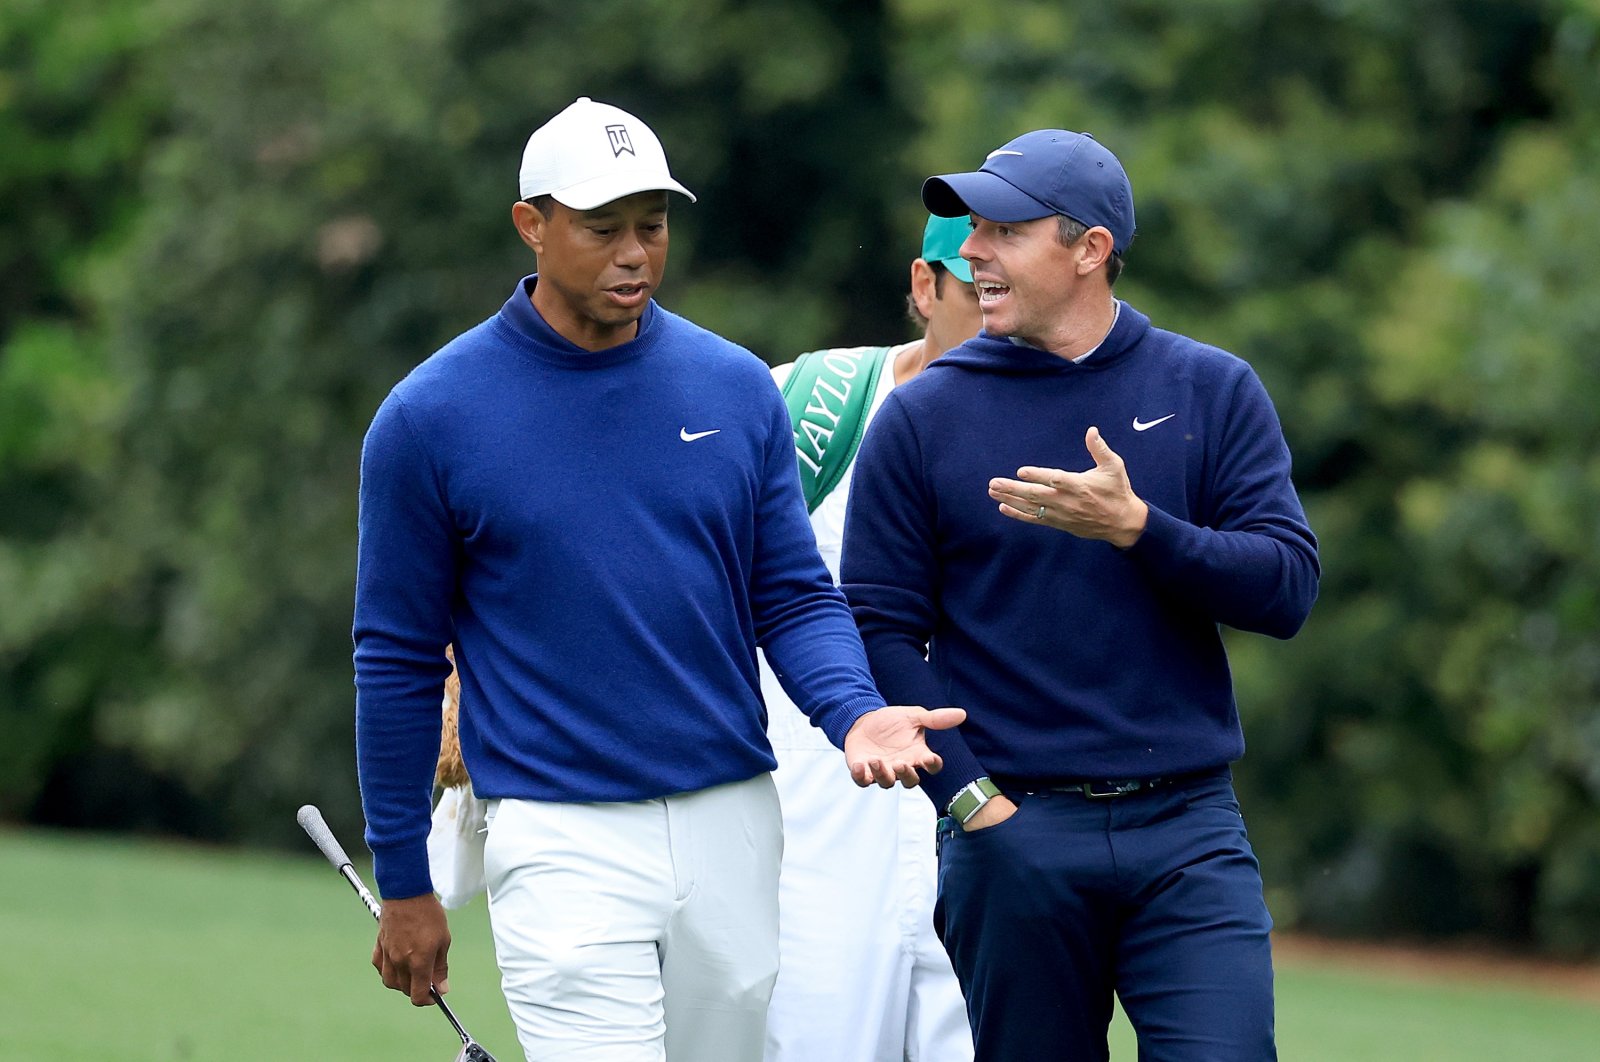 Rory McIlroy of Northern Ireland and Tiger Woods of the United States walk together on the 11th hole during a practice round prior to the 2023 Masters Tournament at Augusta National Golf Club in Augusta, Georgia, U.S., April 03, 2023. (Getty Images Photo)